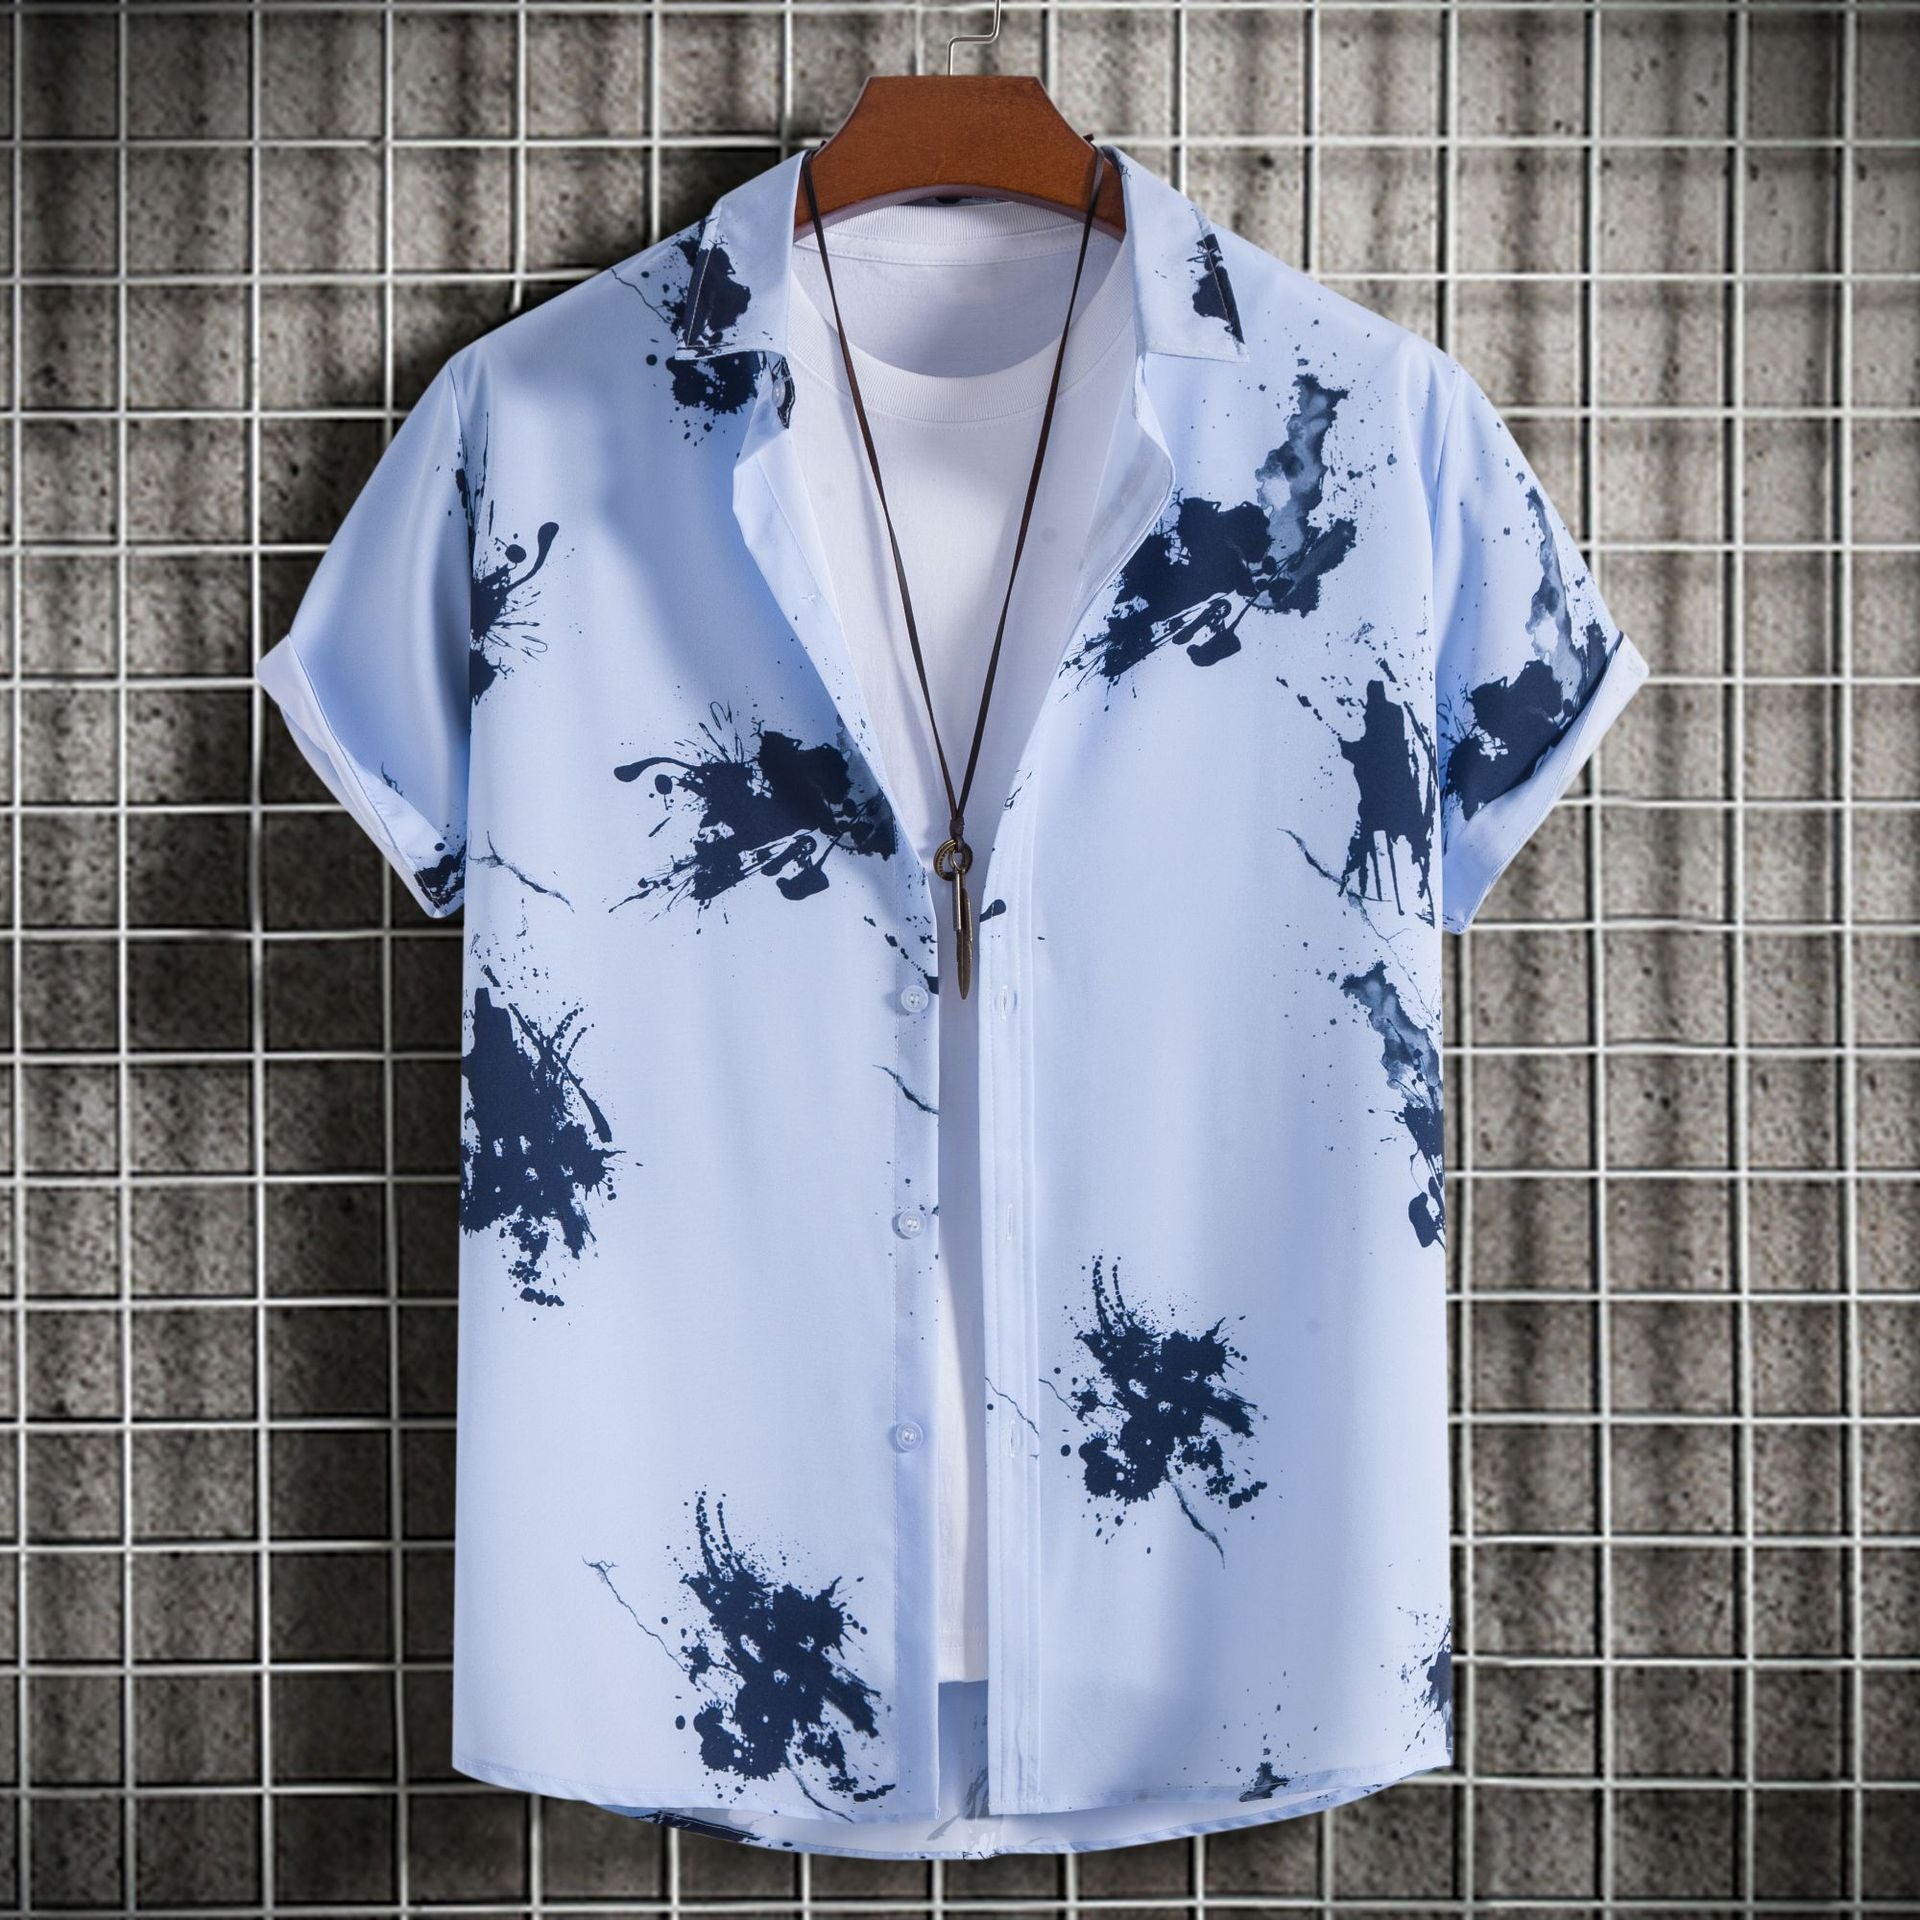 C231 - Men's Fashion Slim-fit Printed Short Sleeve Button Up Shirts - mens button up shirt at TFC&H Co.